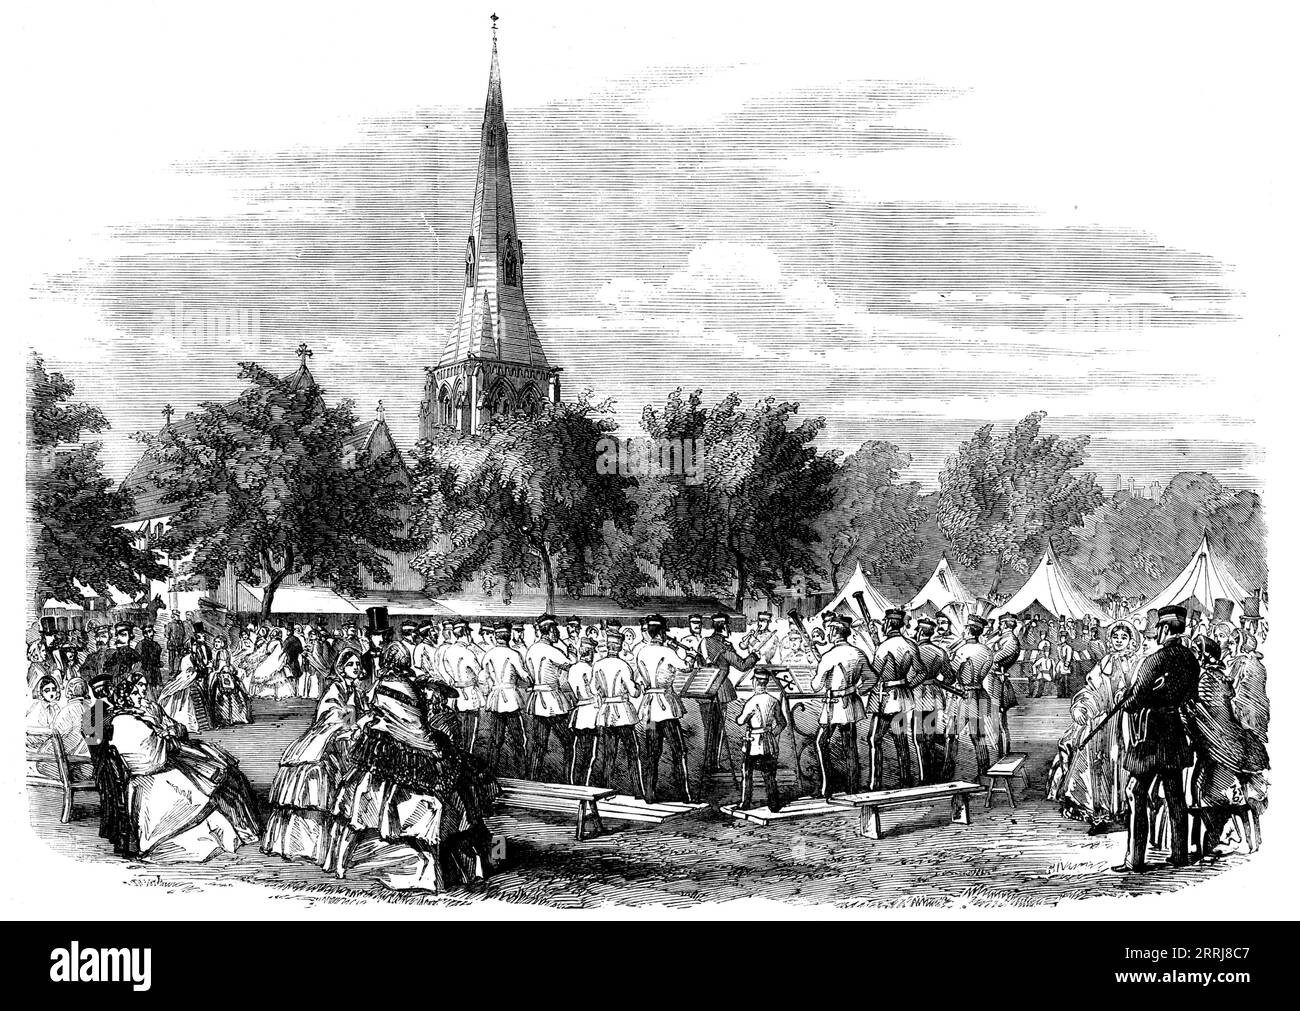 Military Bazaar at Chatham, [in Kent], 1858. 'A grand military bazaar in aid of the funds of the Central Association for Improving the Condition of the Wives and Families of Soldiers and Sailors was held at Chatham on Thursday and Friday last week. The stalls were crowded with every description of articles usually found at bazaars, received by the committee from all parts of the country, the principal ladies of the garrison and neighbourhood superintending the sale. The bands of the Royal Engineers and Royal Marines were in attendance, and a large number of visitors was attracted. The sum real Stock Photo